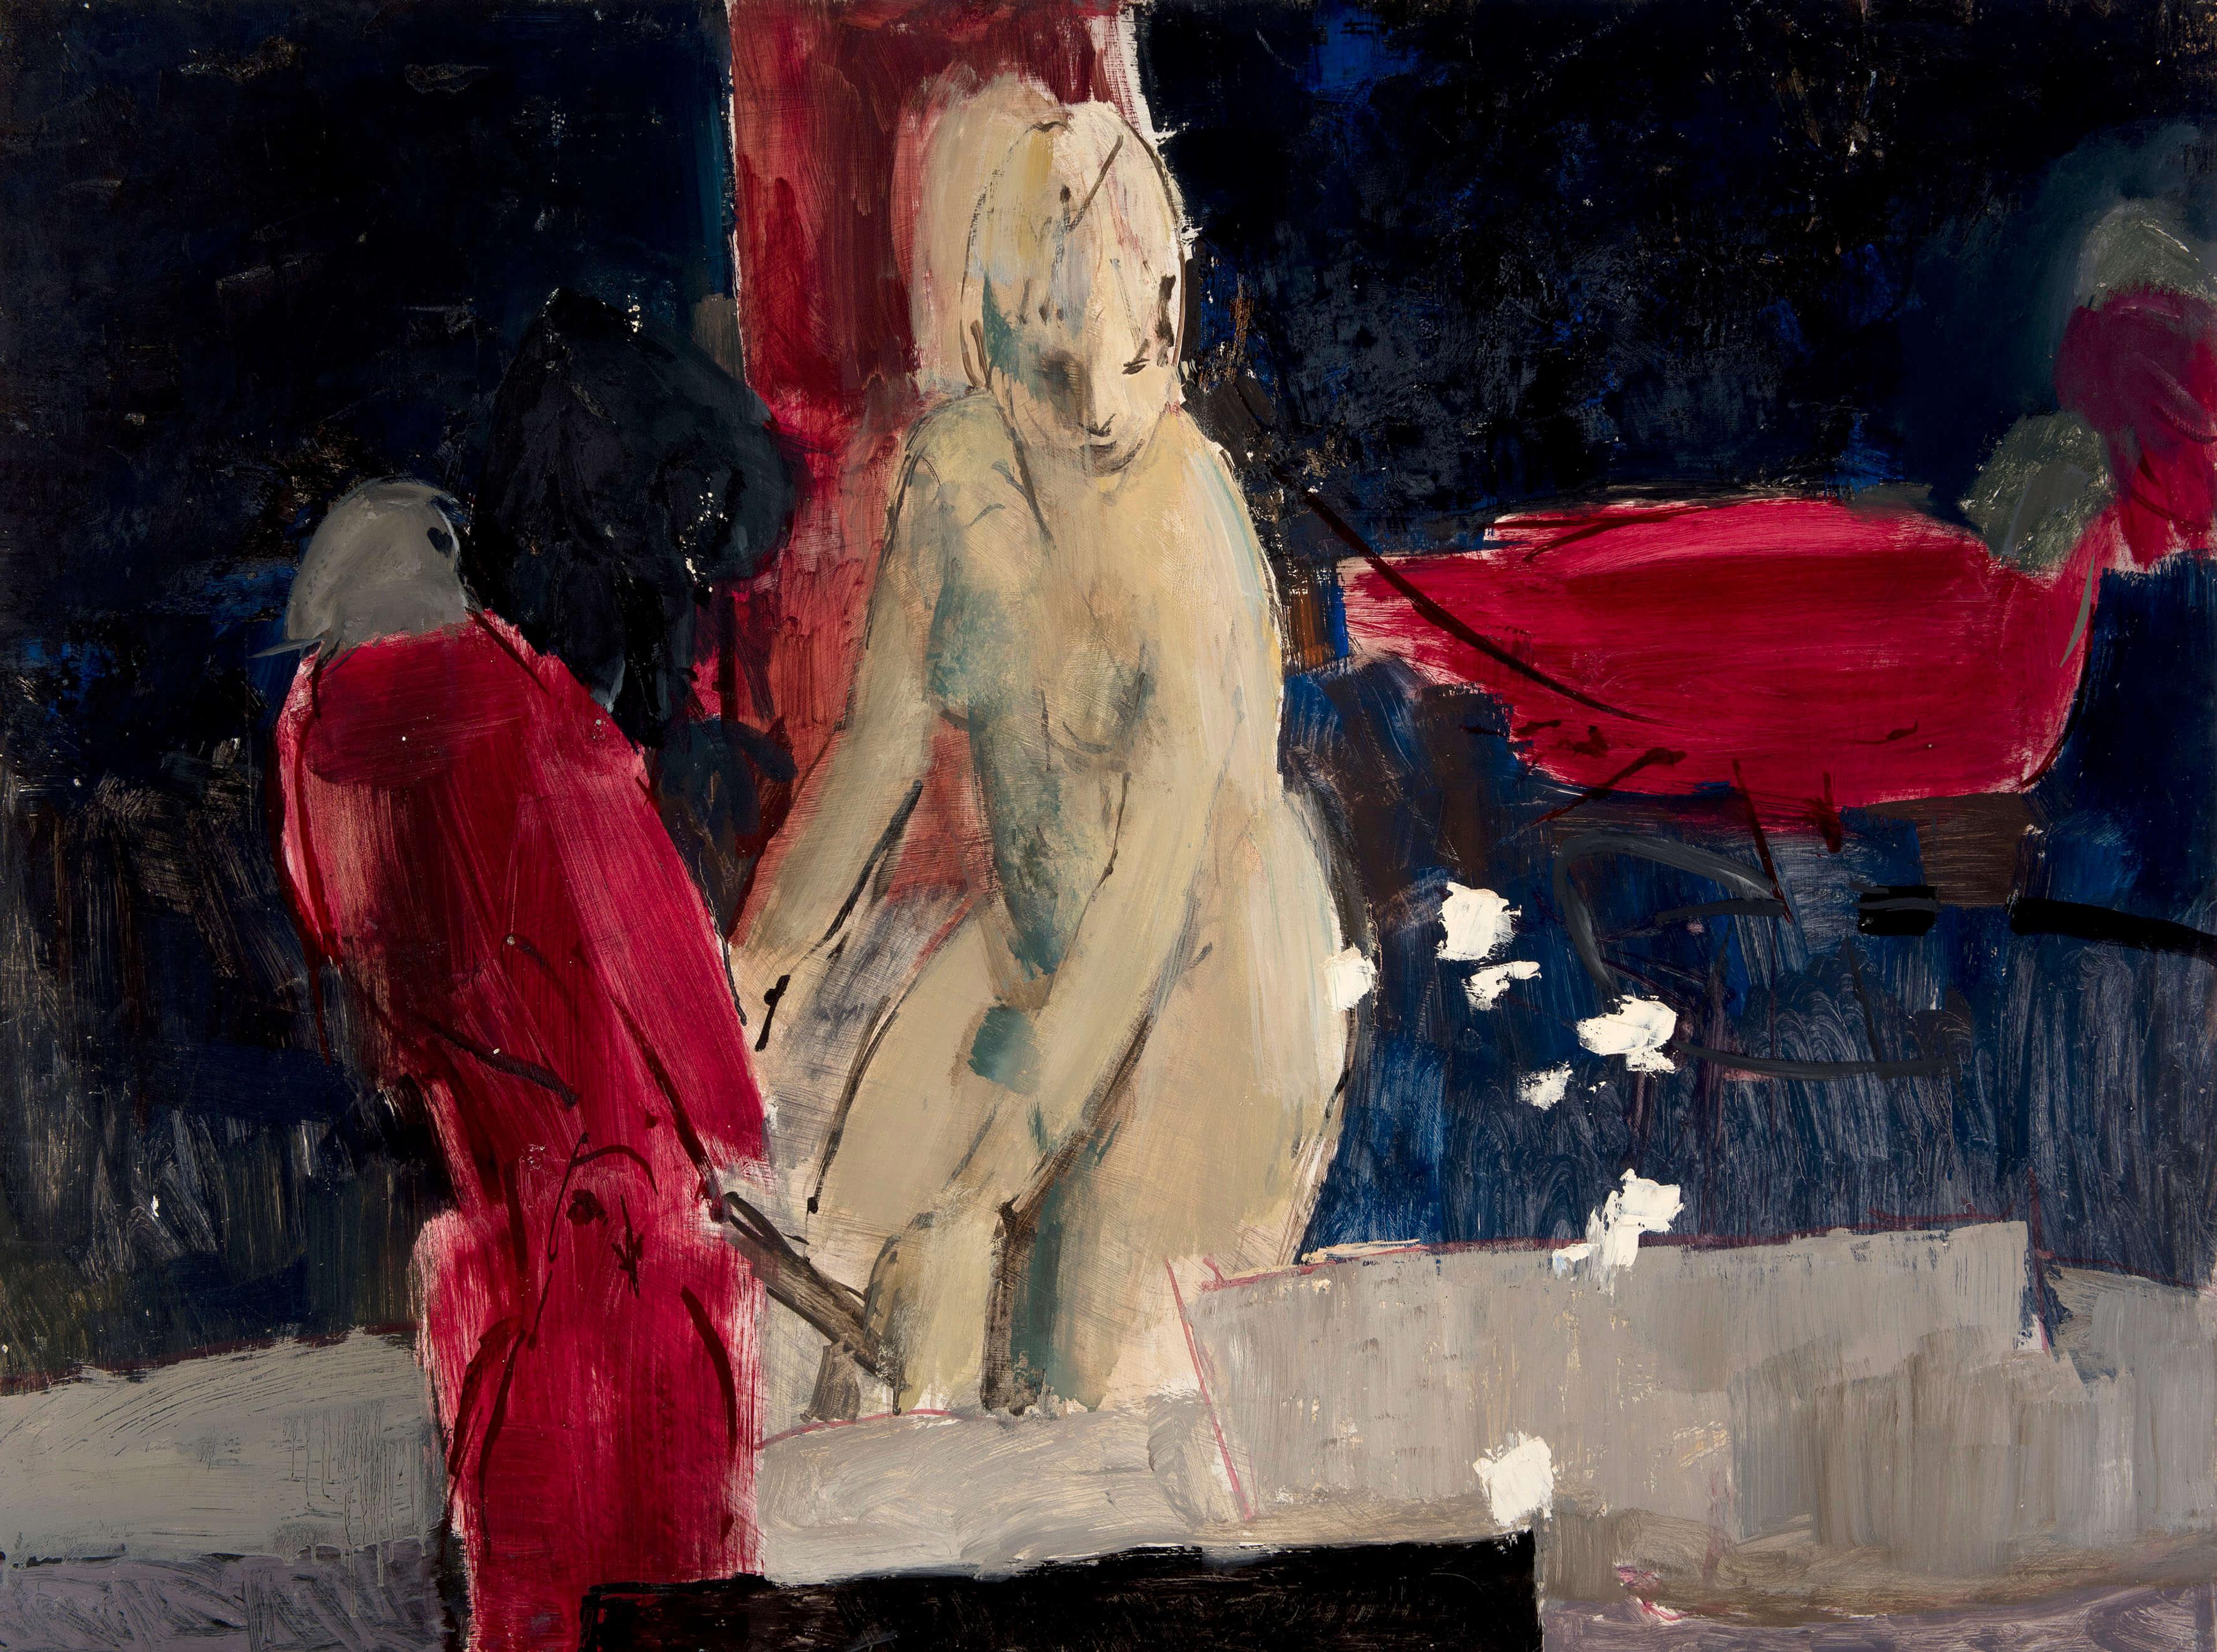 An expressive painting featuring two figures set against a dark background